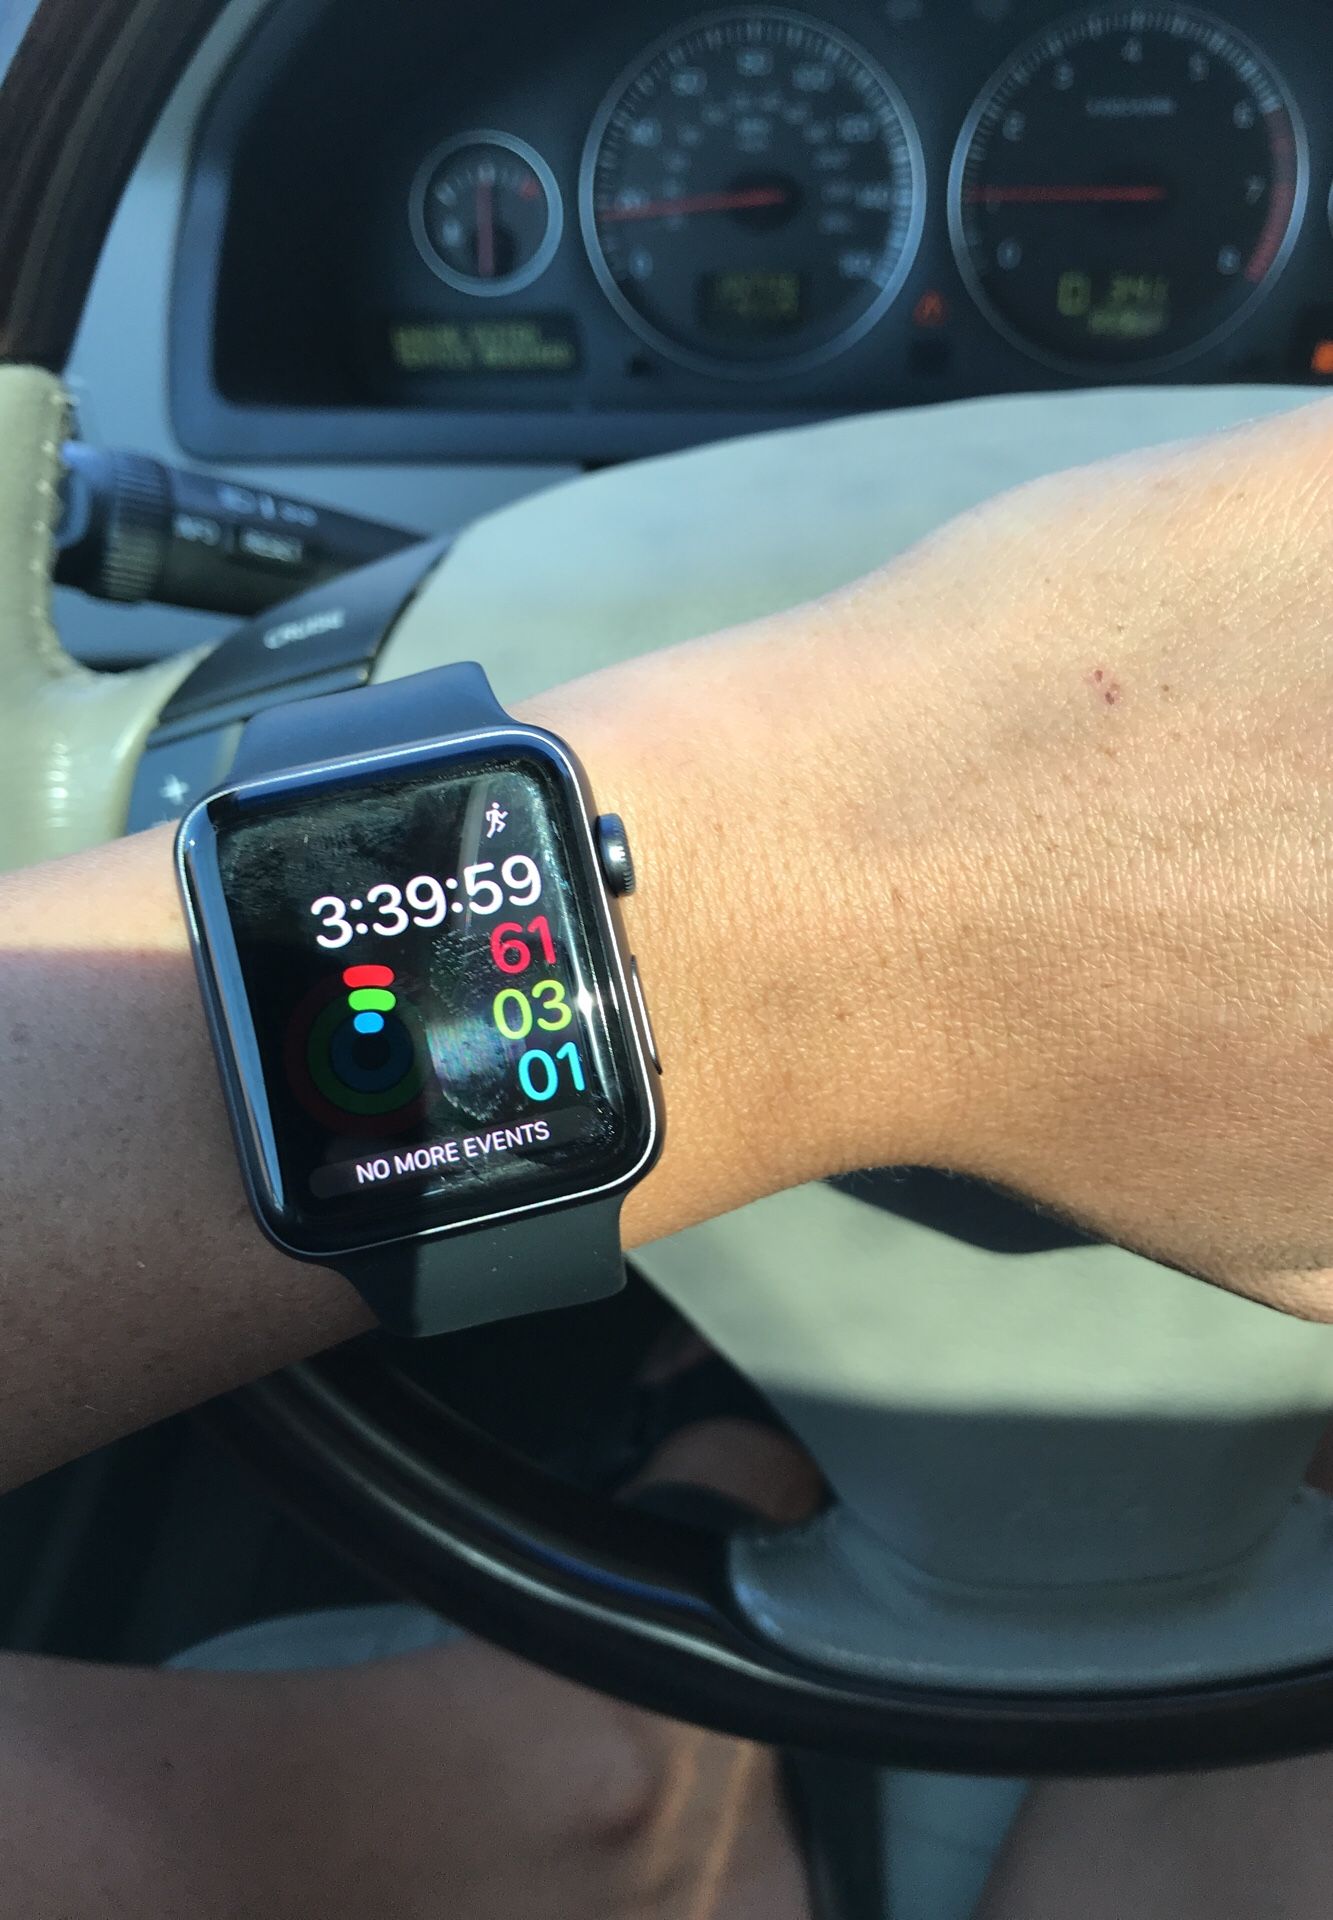 Brand new 42mm Apple Watch series 3- has gps but no cellular